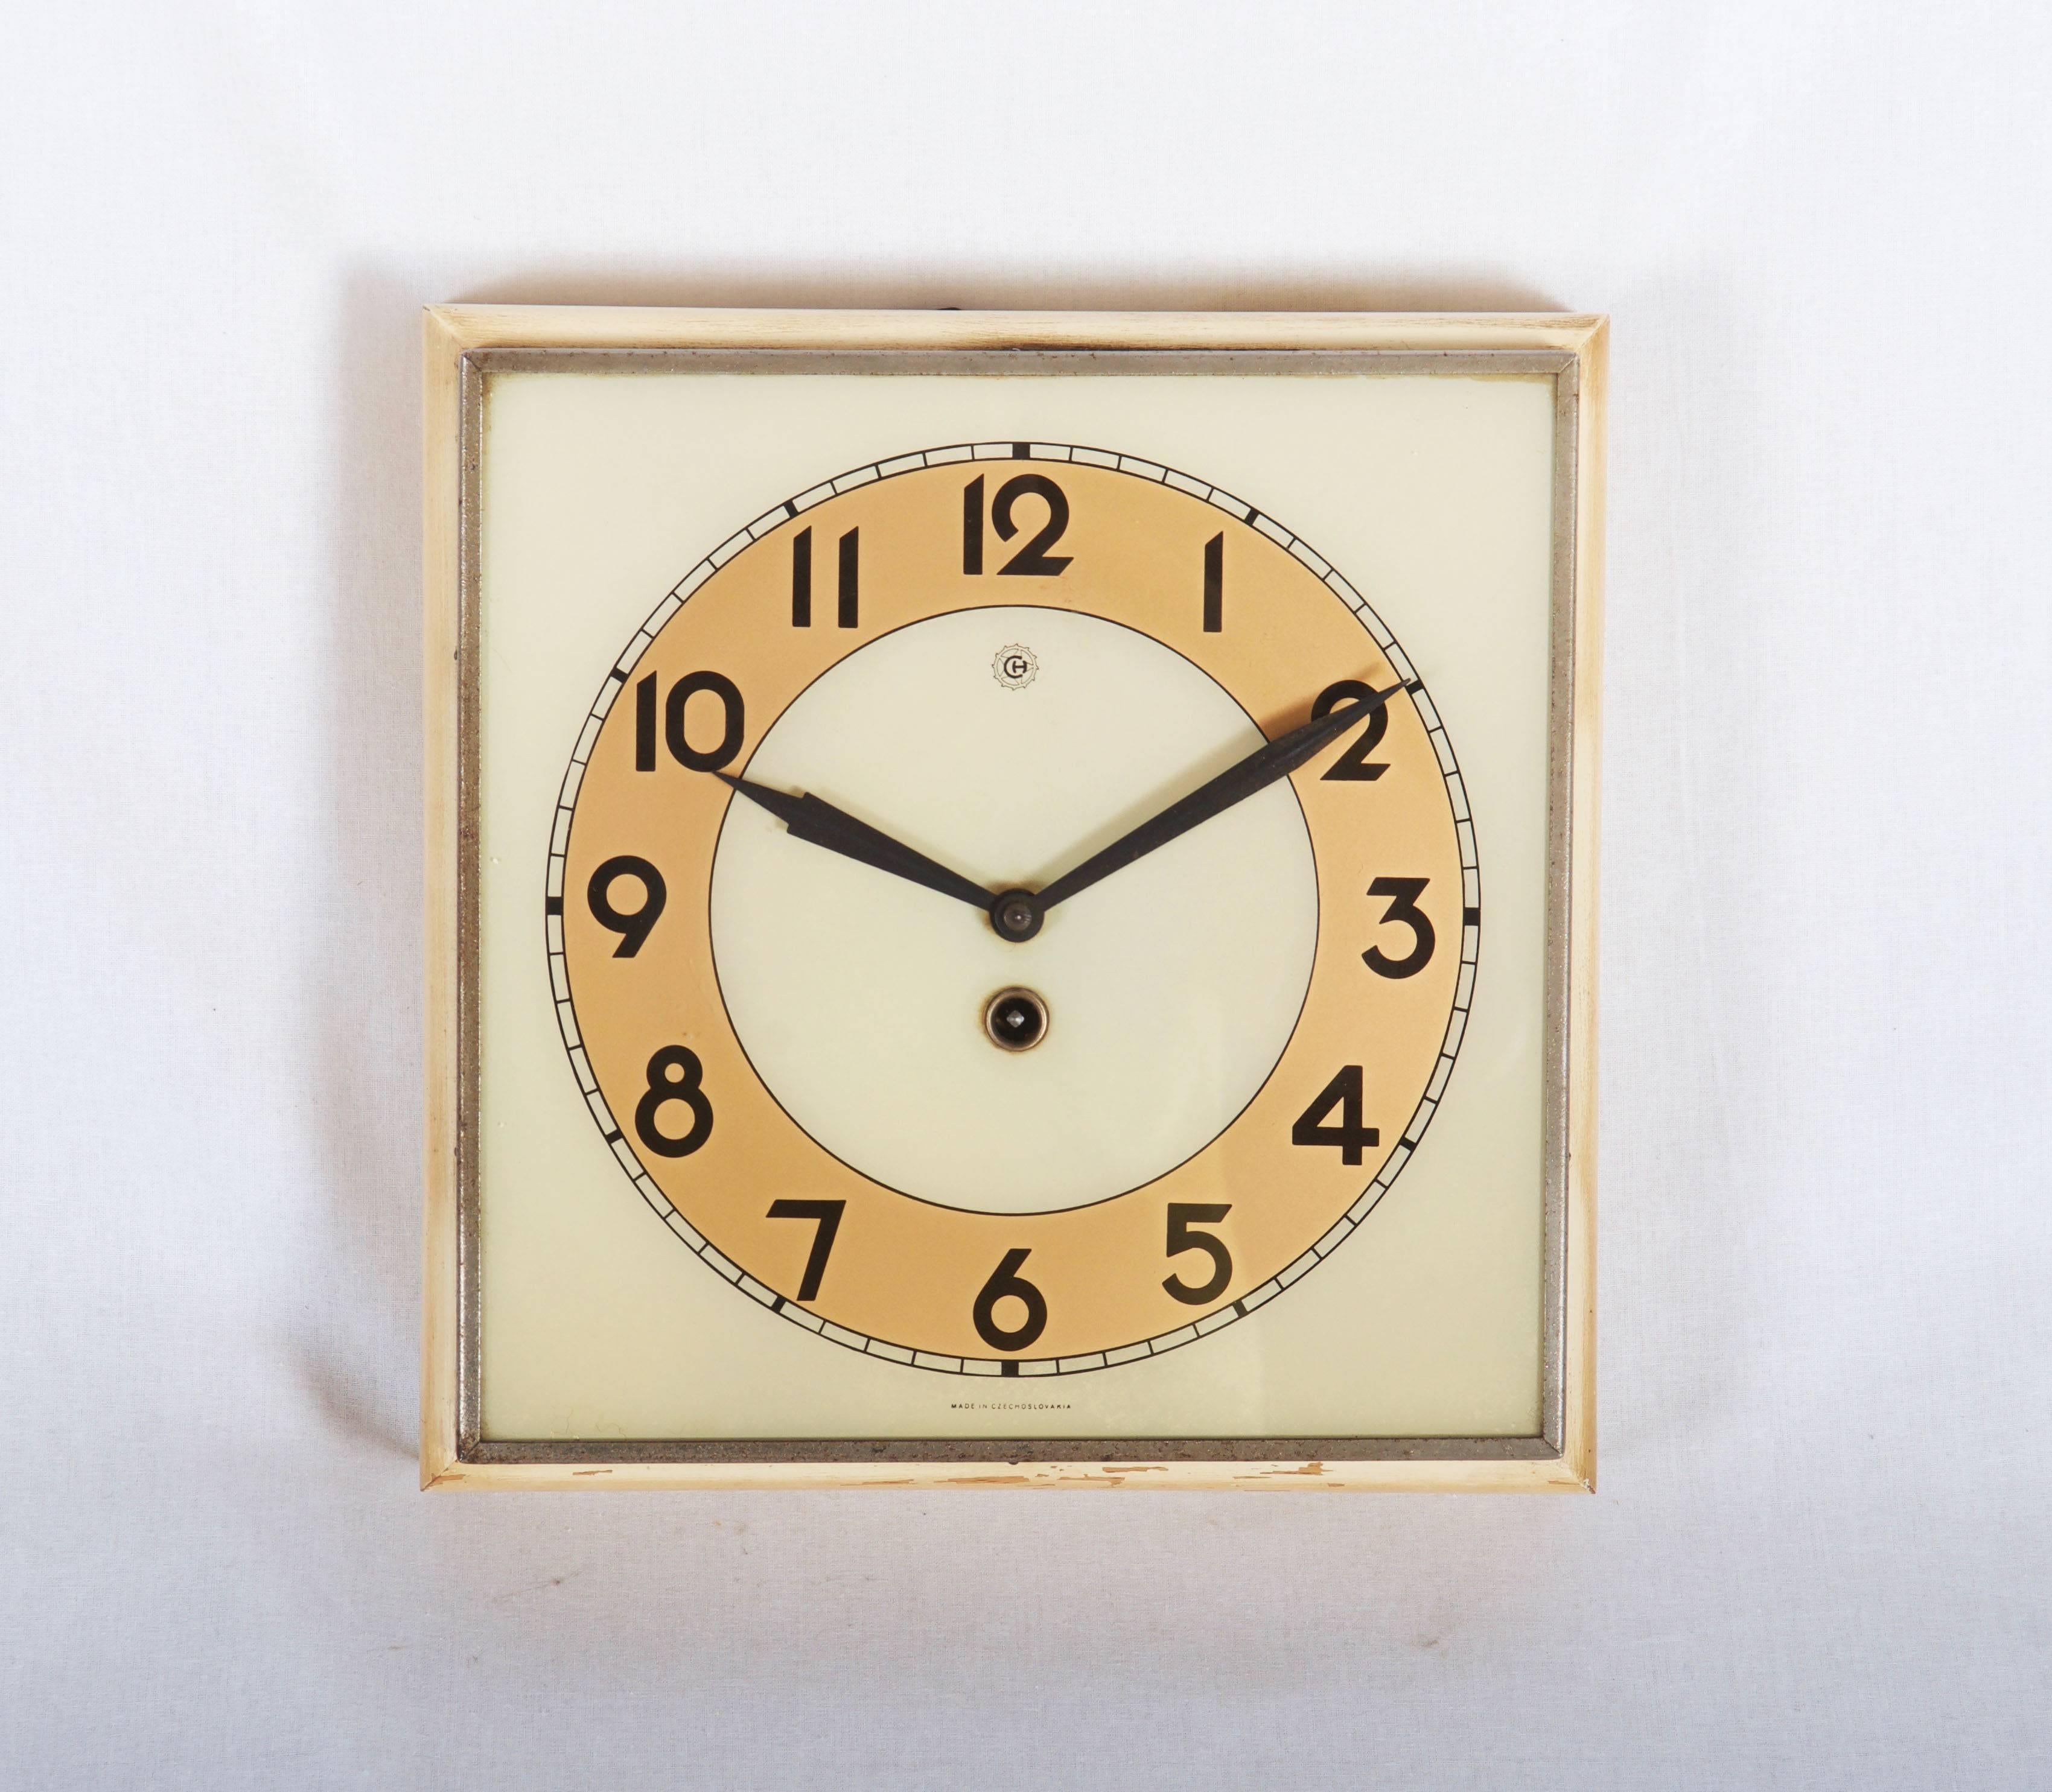 Wooden frame with white glass and black digits caught in steel, made by Chomutov/Kienzle in the 1930s. The original movement was changed to an electric one powered by a small battery.
Delivery time 2-3 weeks.